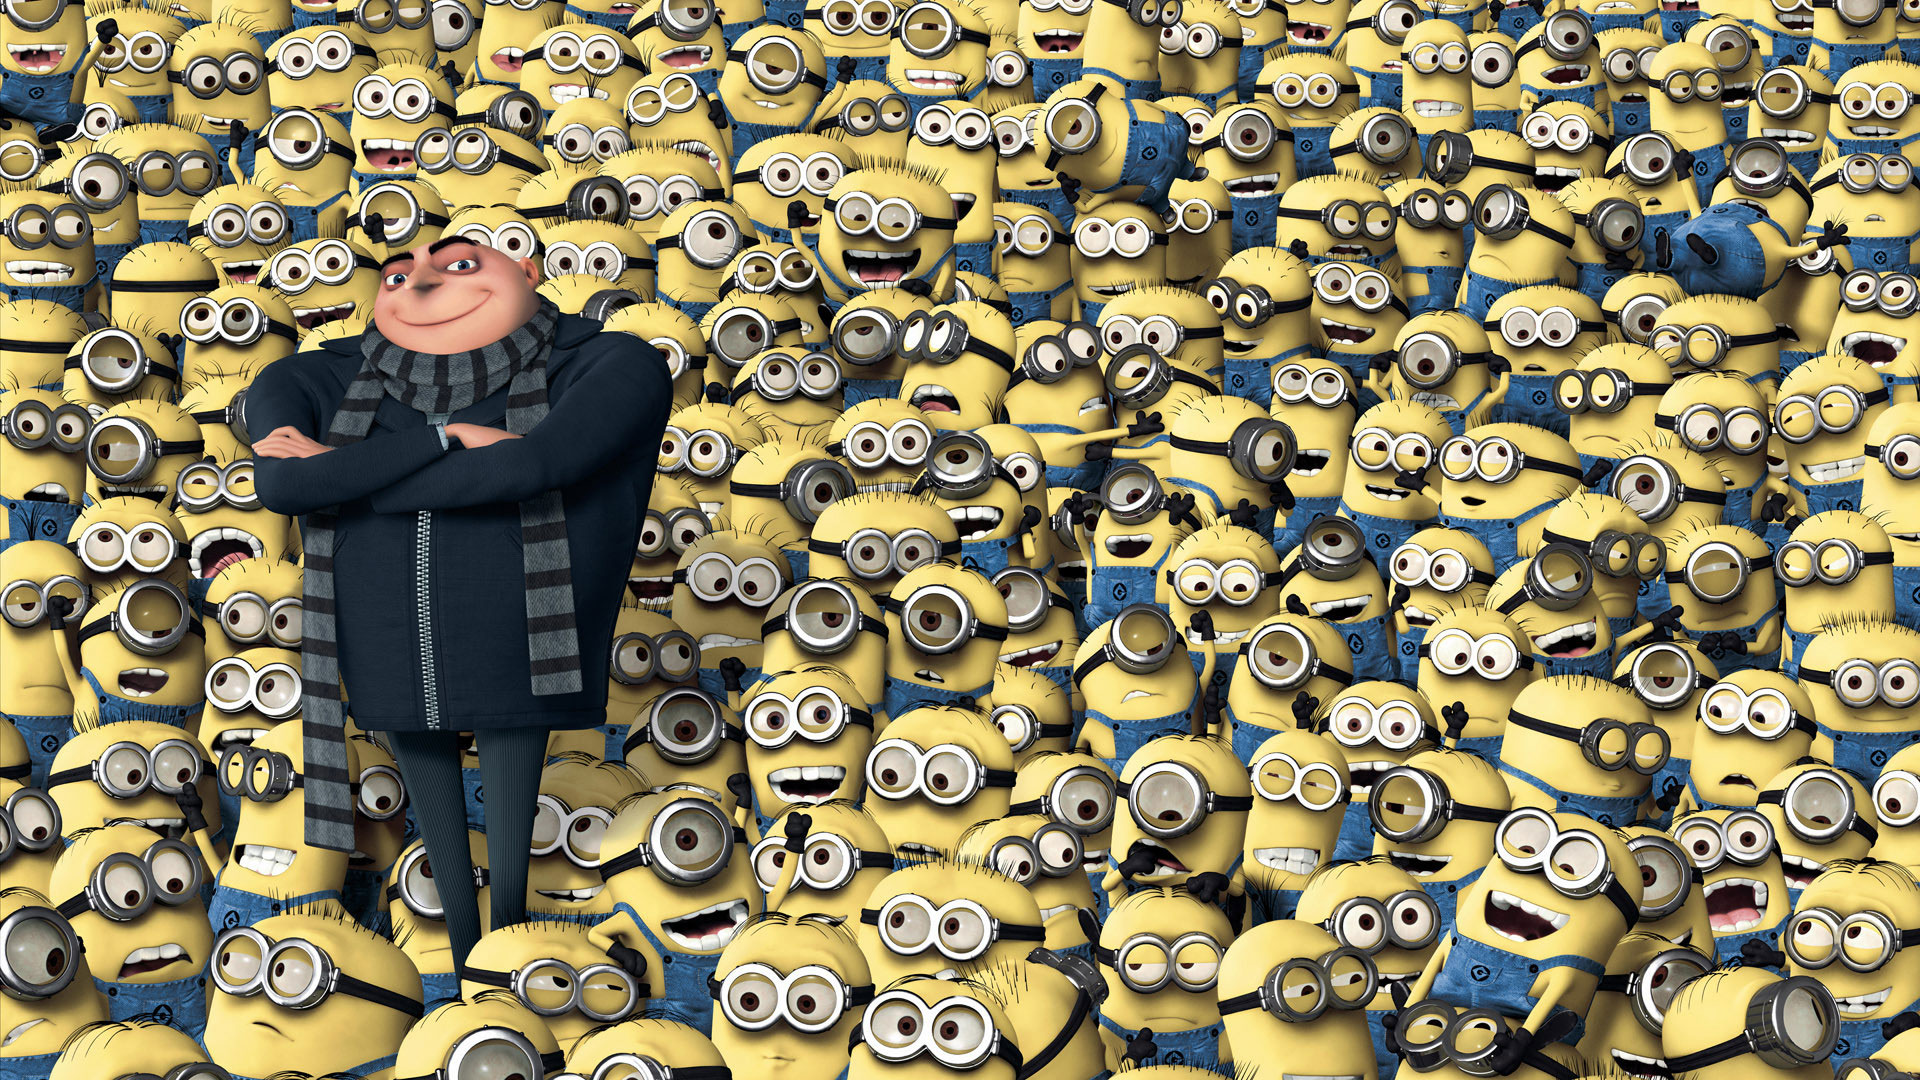 Despicable Me 2 Minions Pictures, Movie Wallpapers & Facebook